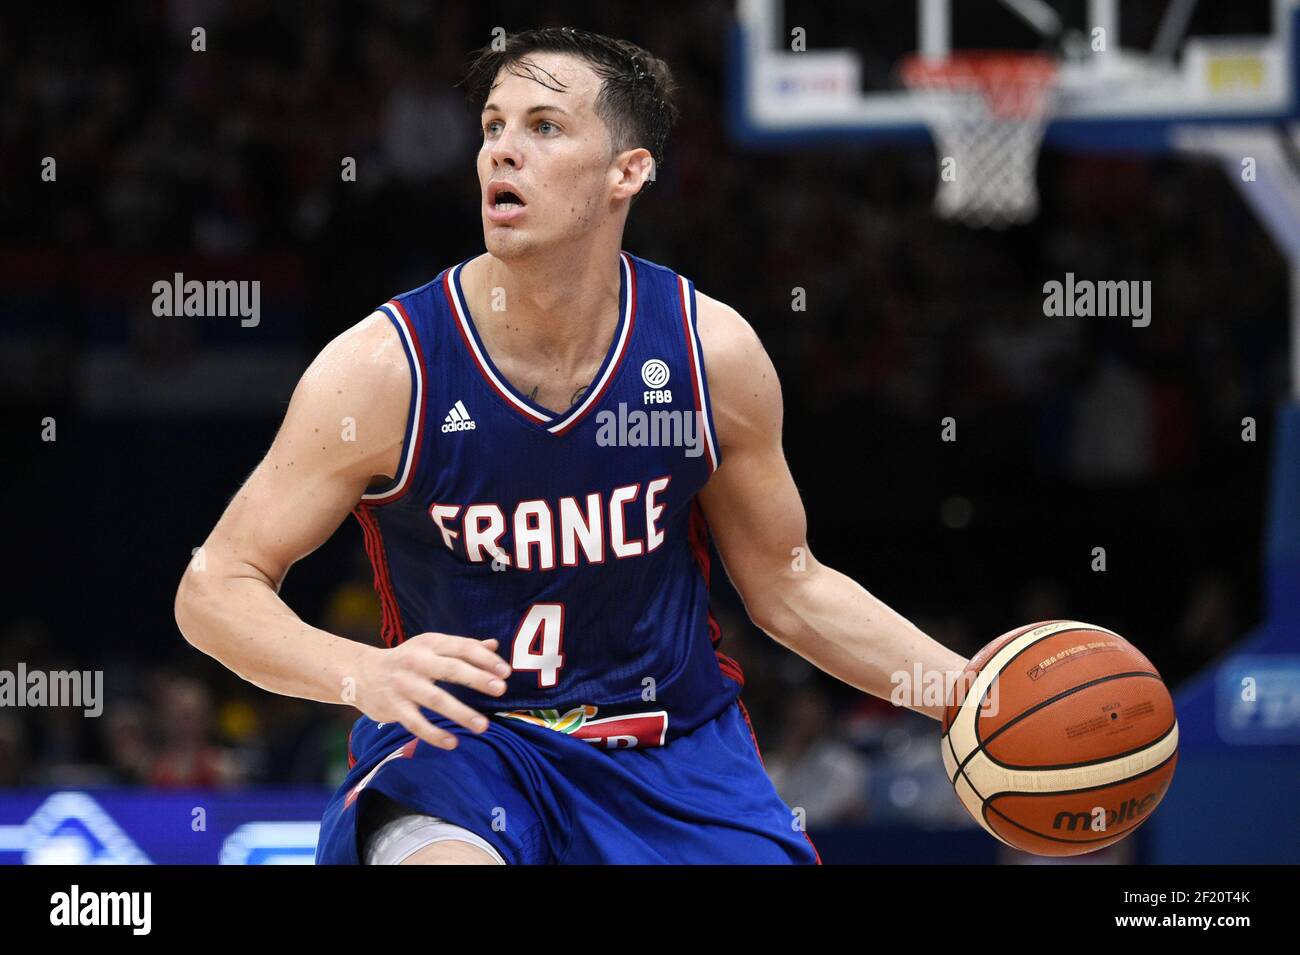 France's Thomas Heurtel competes during the Friendly Game Basket Ball Match  between France and Serbia, at